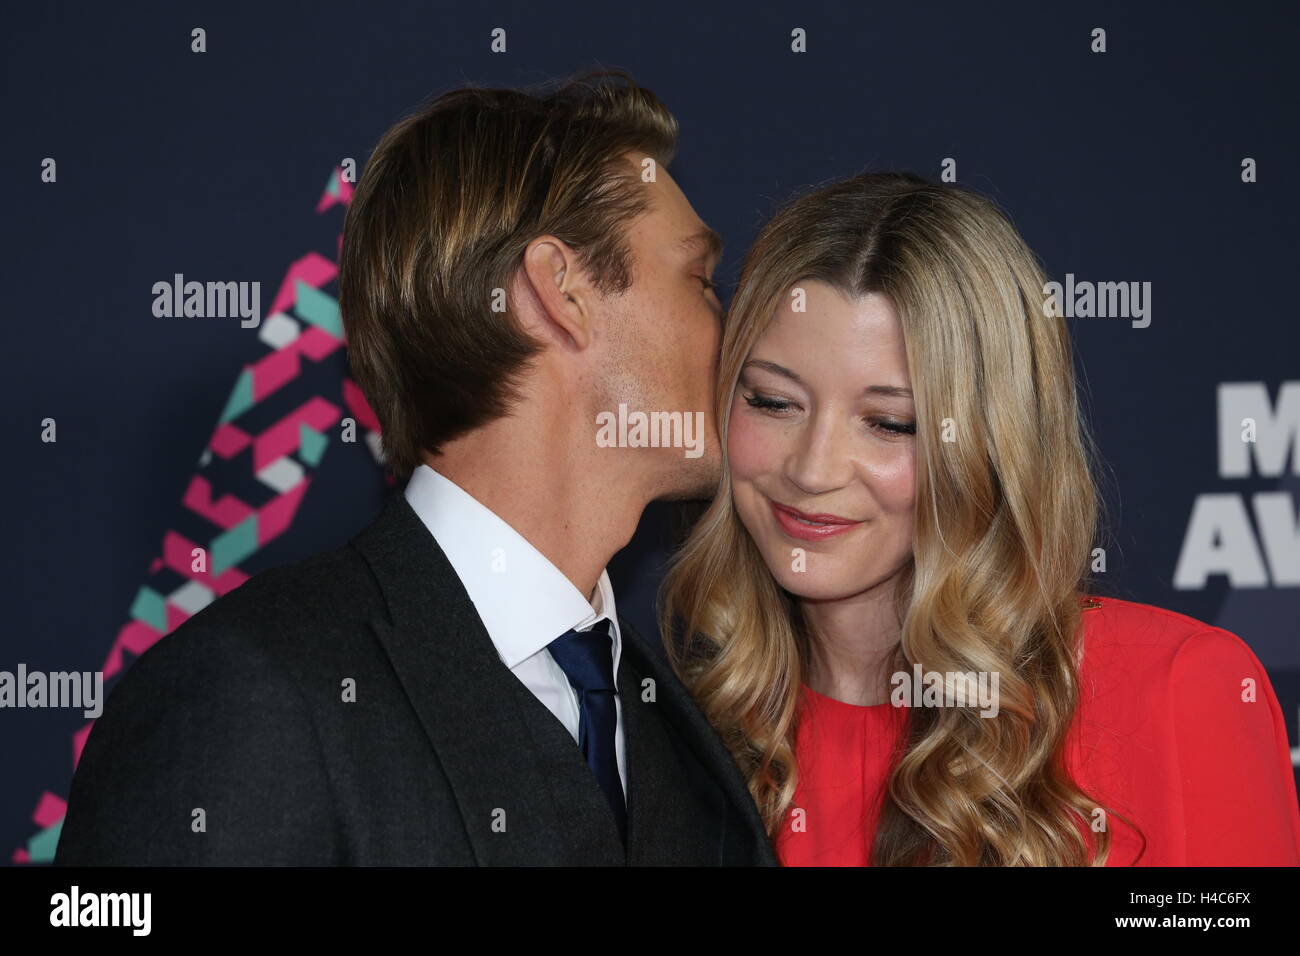 Chad Michael Murray whispers to Sarah Roemer on the red carpet at the CMT Music Awards at Bridgestone Arena on June 8th, 2016 in Nashville, TN. Stock Photo